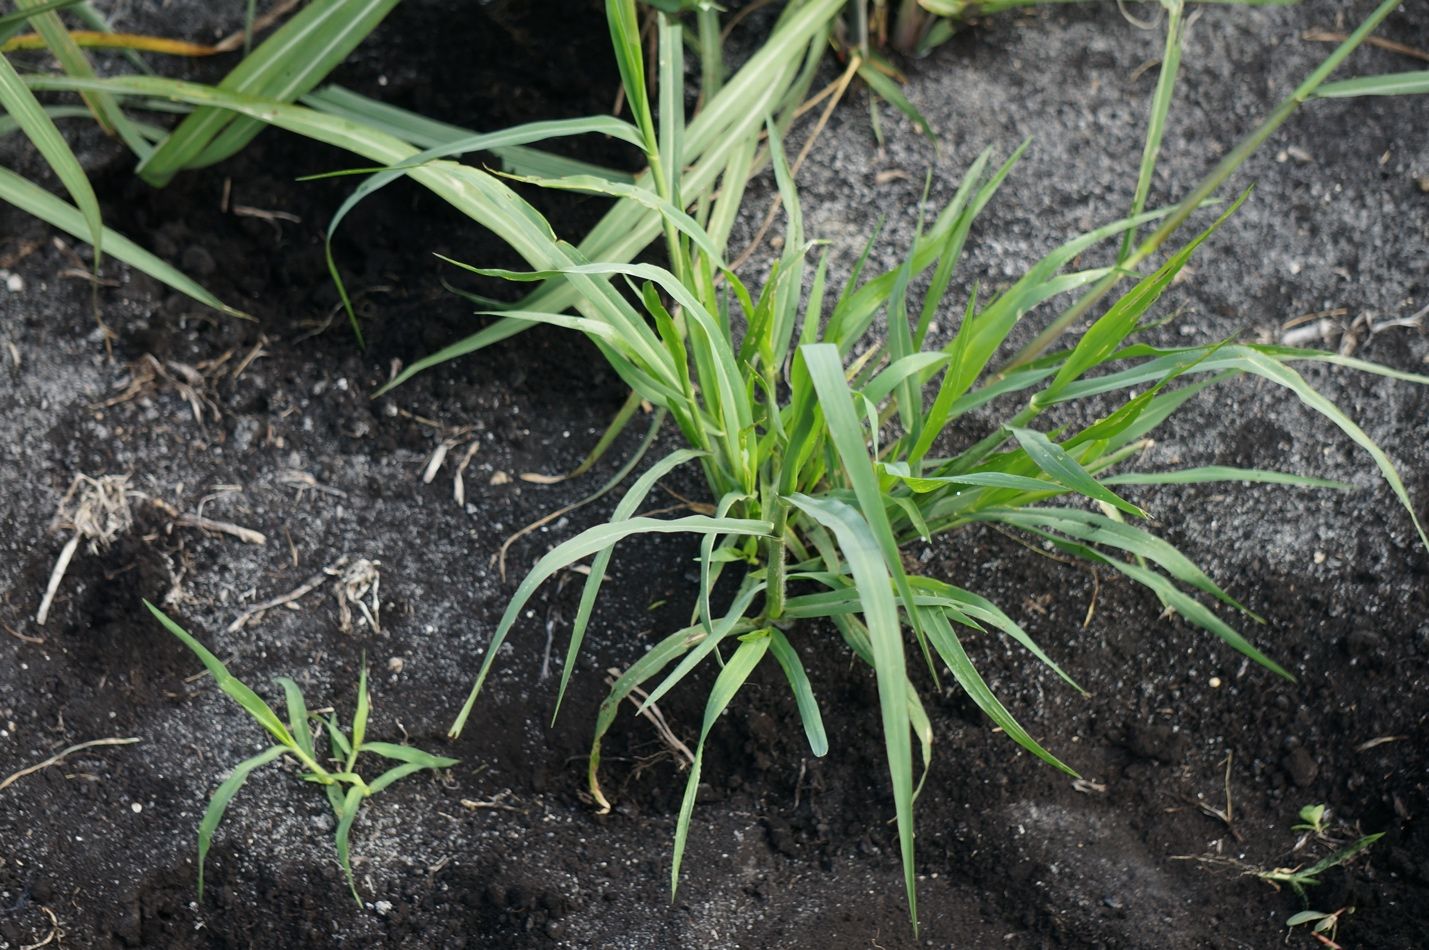 Small fall panicum (Panicum dichotomiflorum) seedling (on the left) is much easier to control than tillering a more mature plant (on the right). 